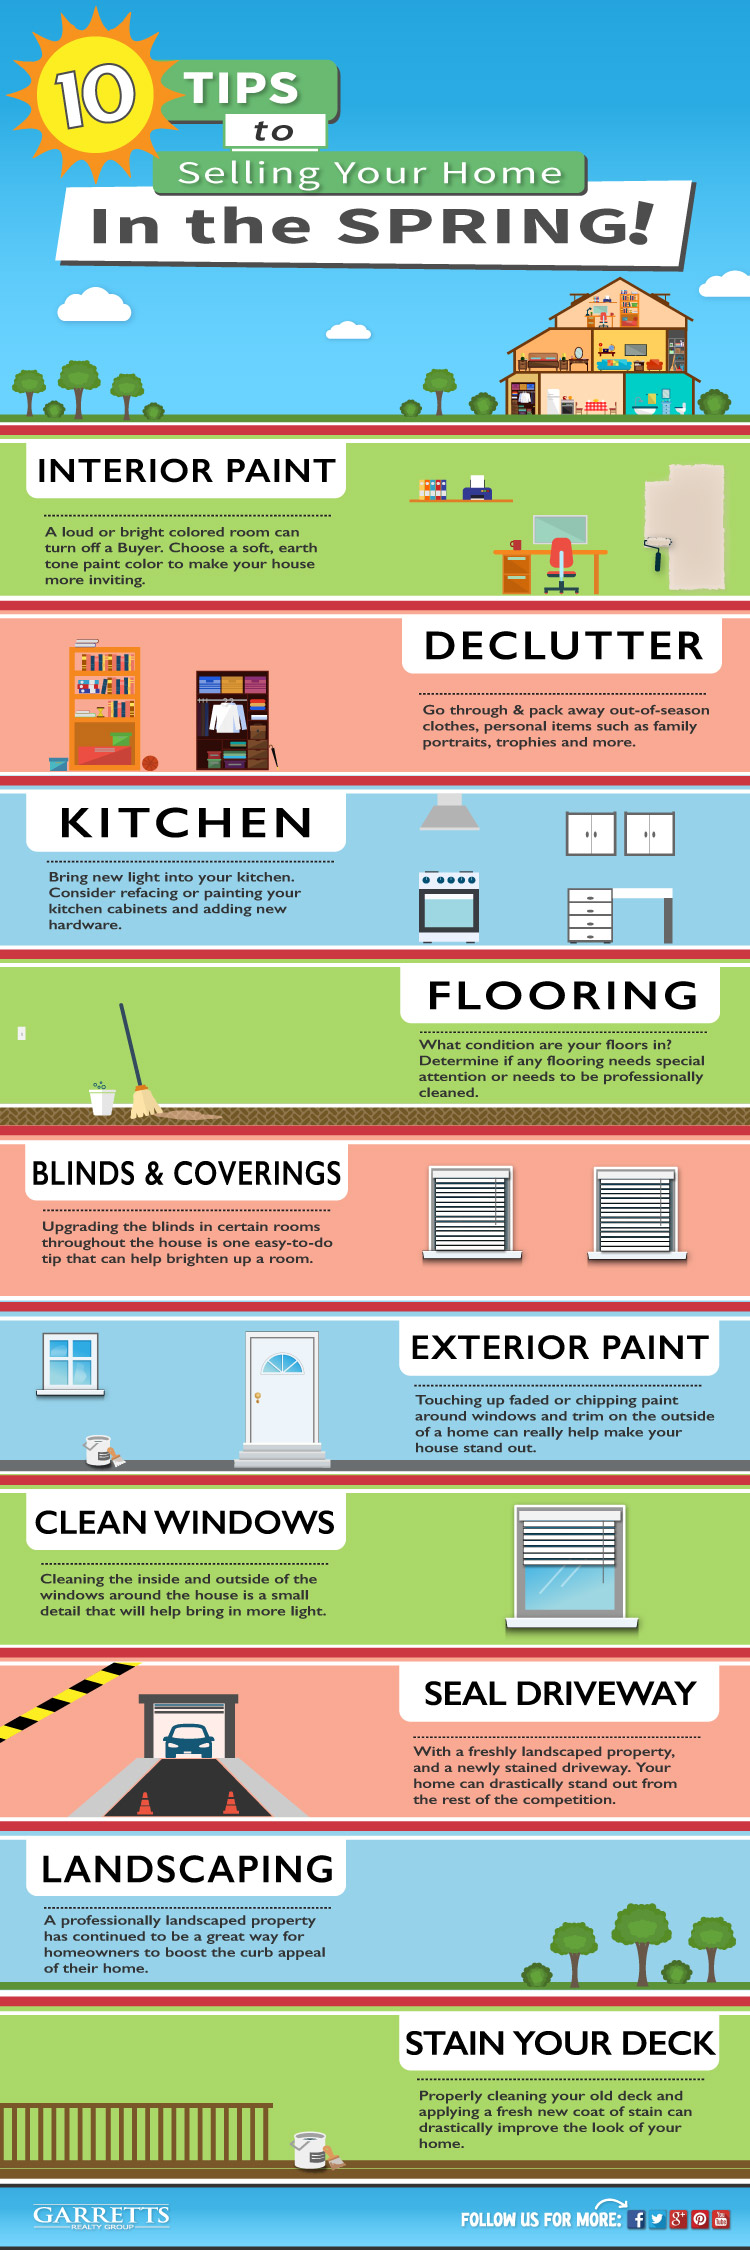 Tips to Selling your Home in the Spring Infographic - Real Estate